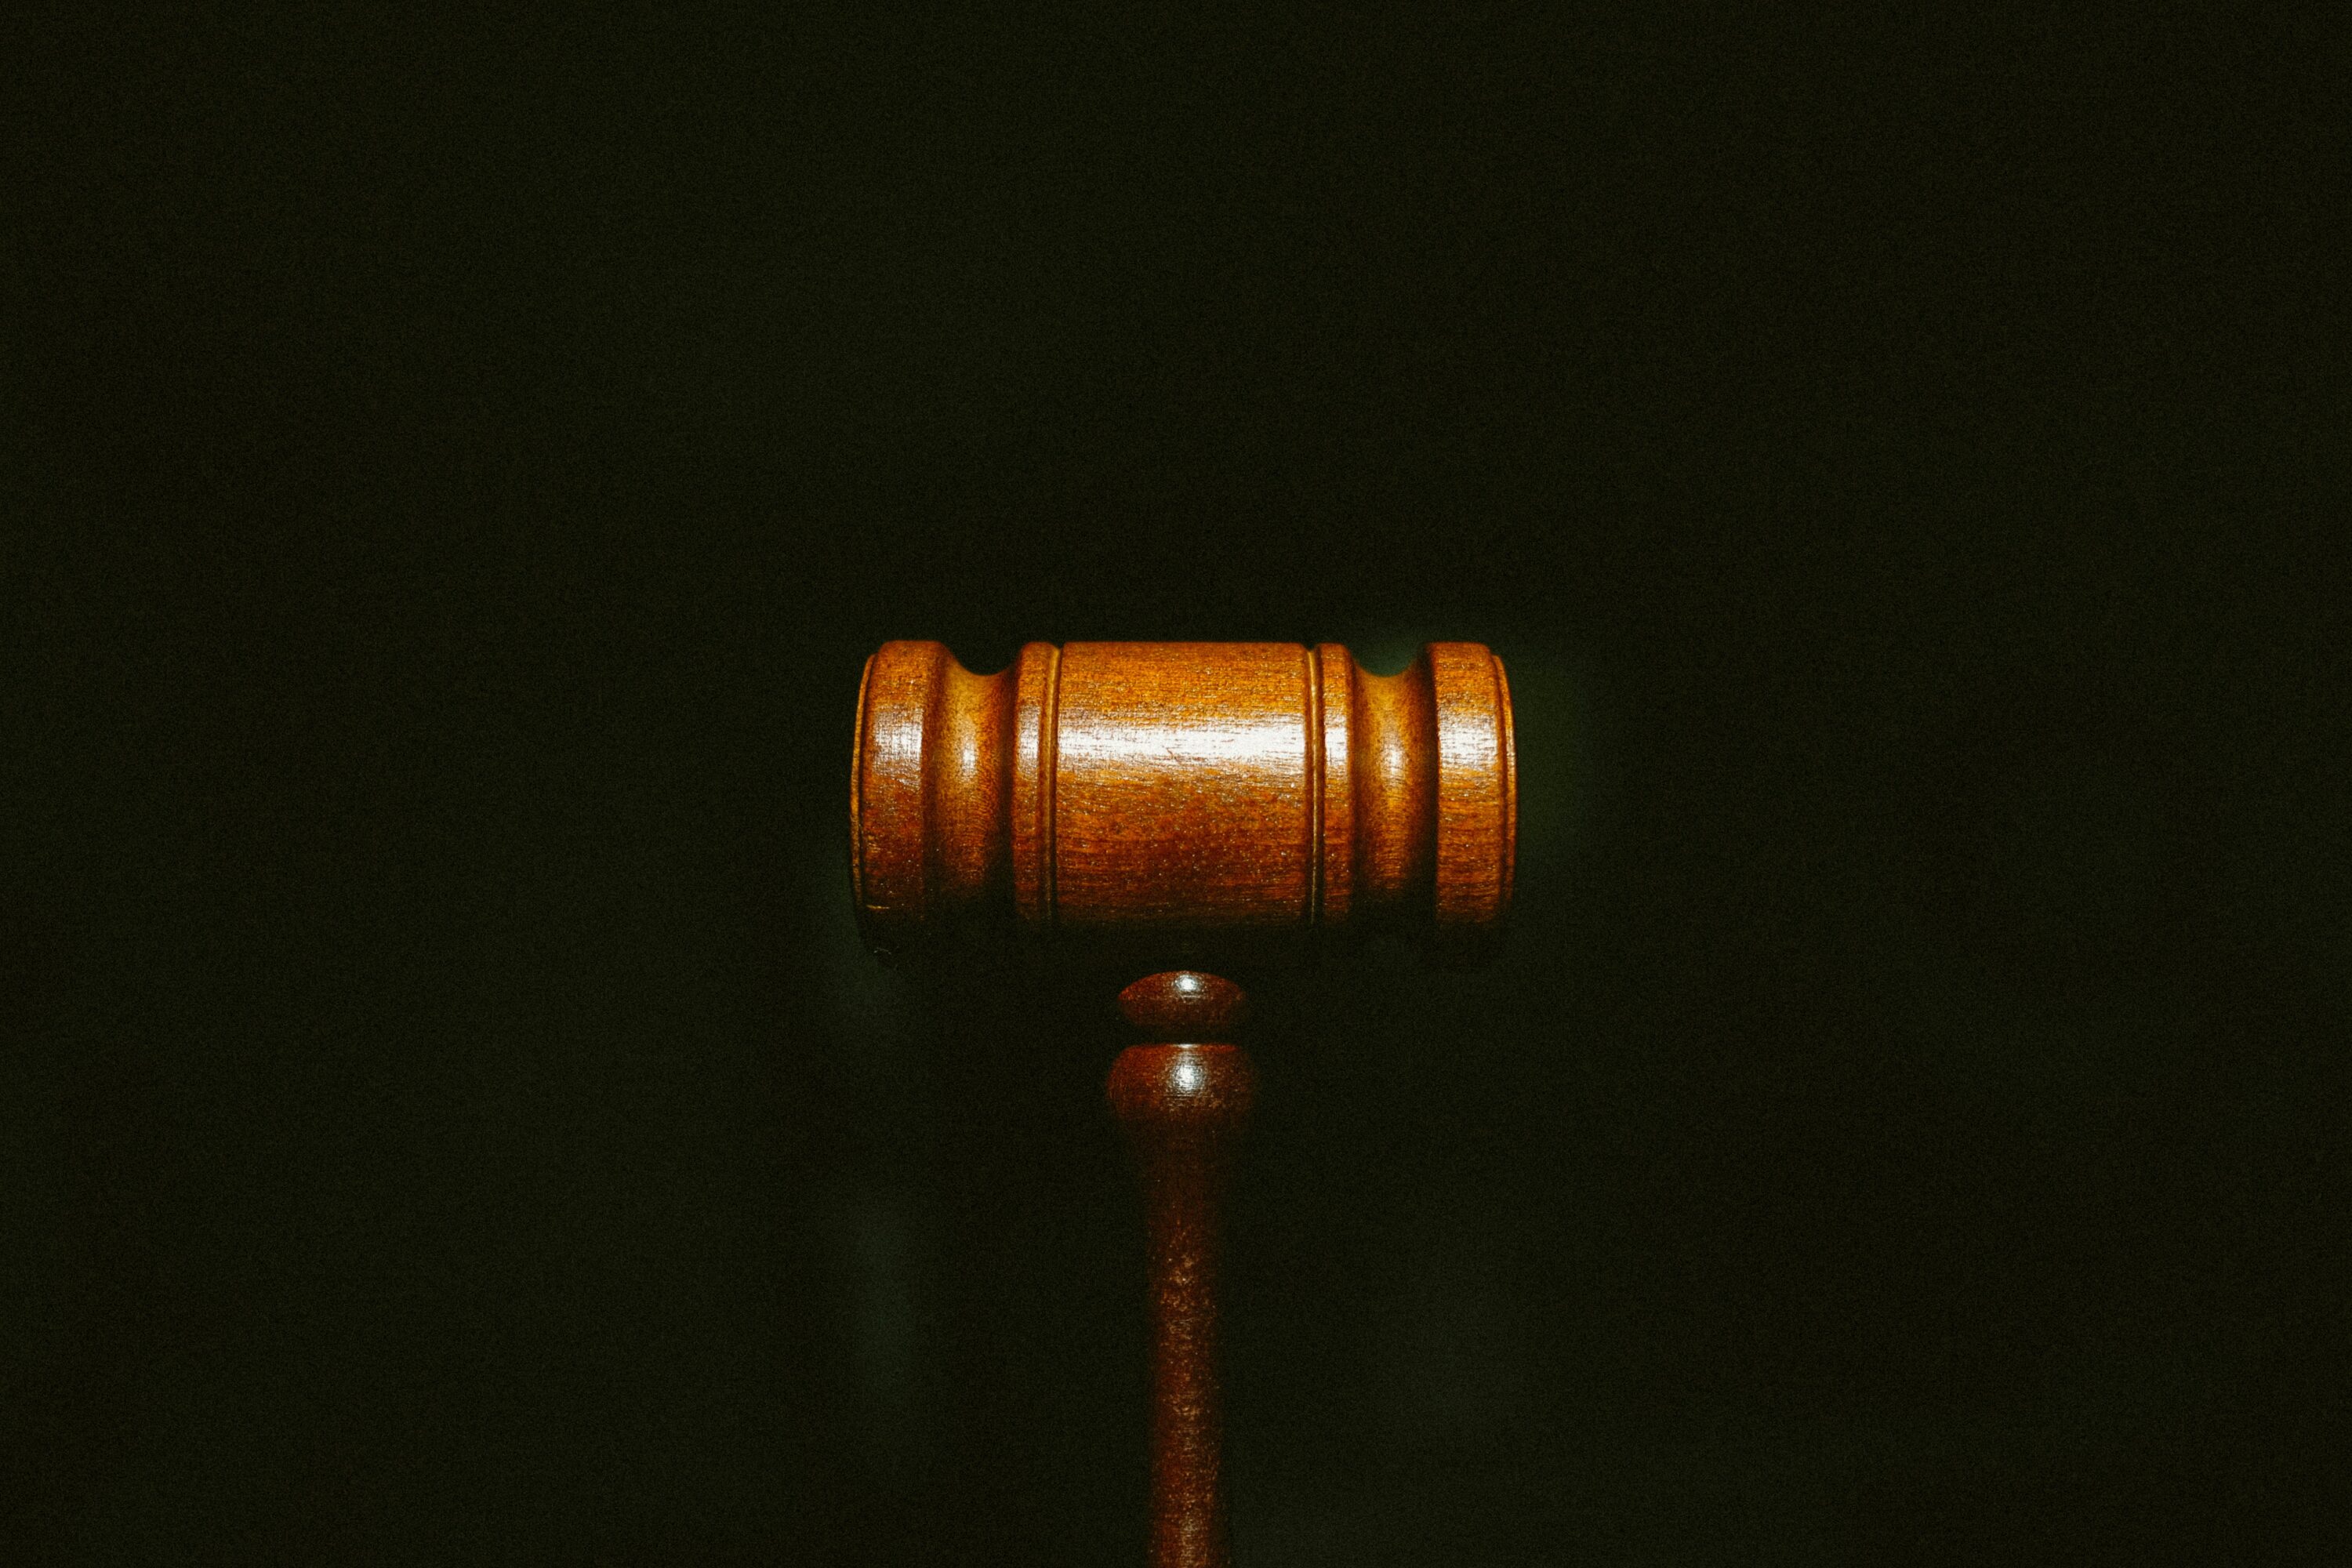 Terraform Labs settles fraud case with SEC for $4.5B